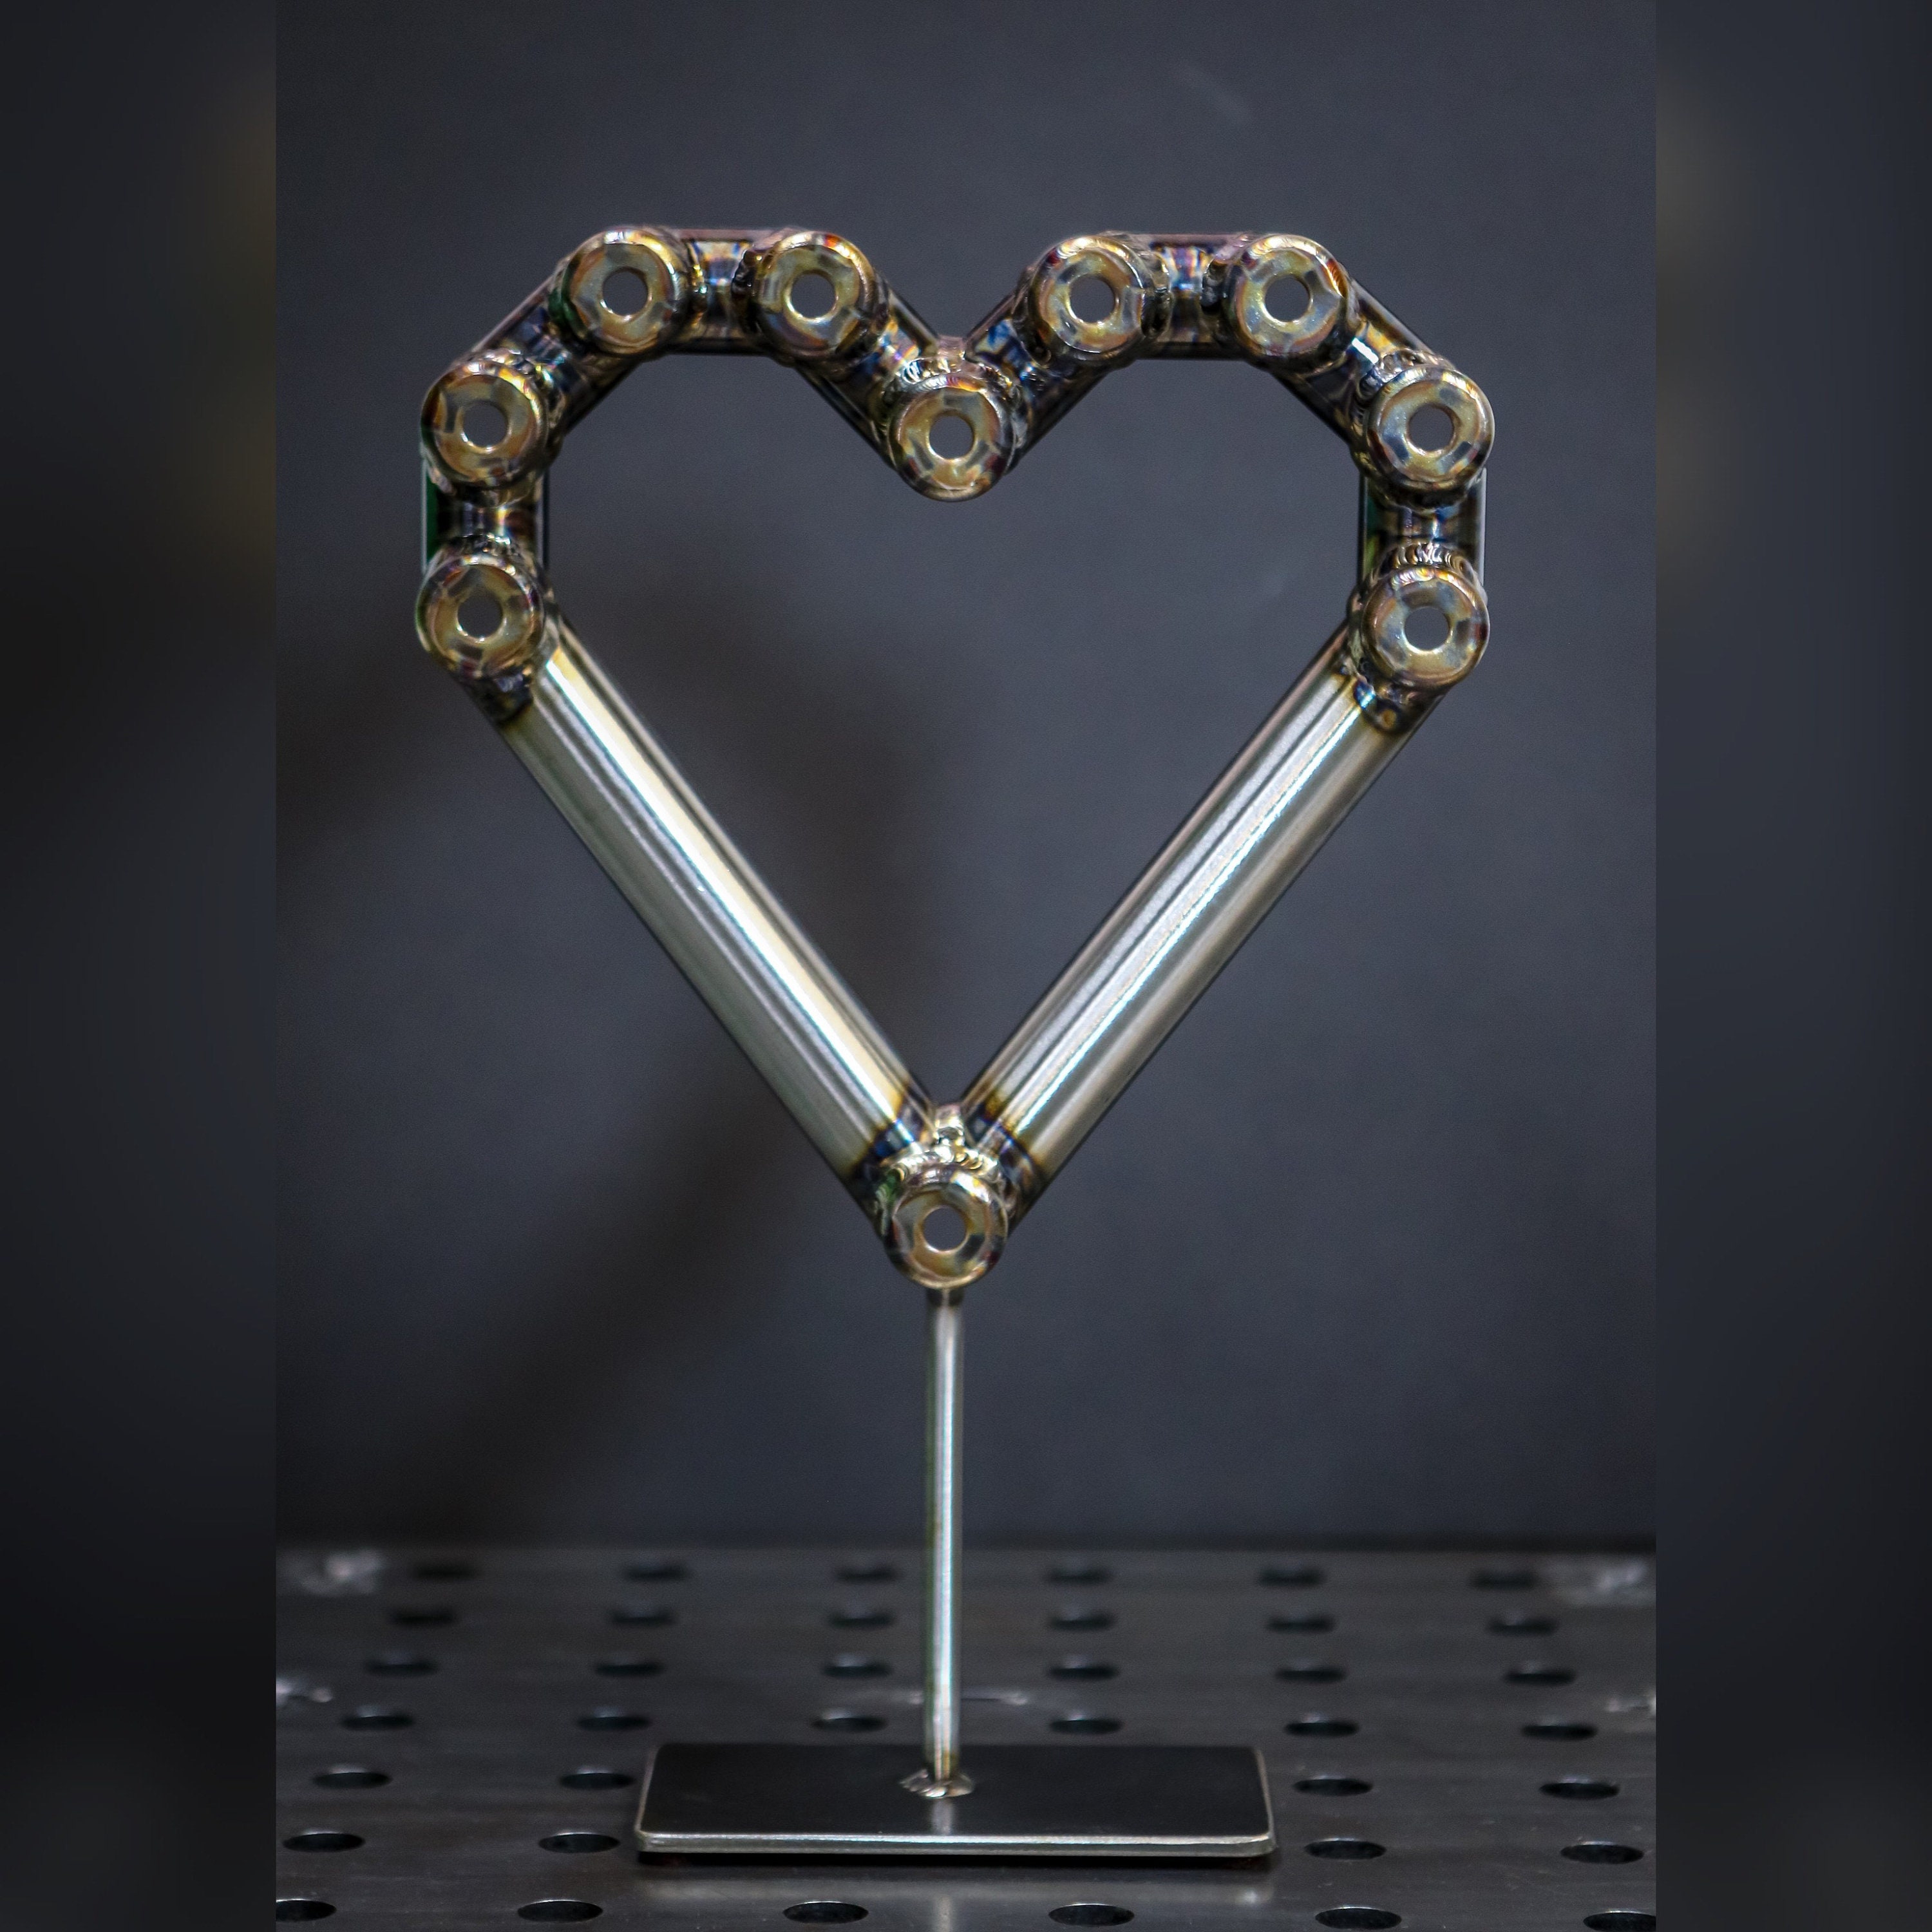 Heart Tube Frame Statue Welded Metal Art Perfect Gift for Valentines Day,  Wedding, Anniversary, Garage -  Canada